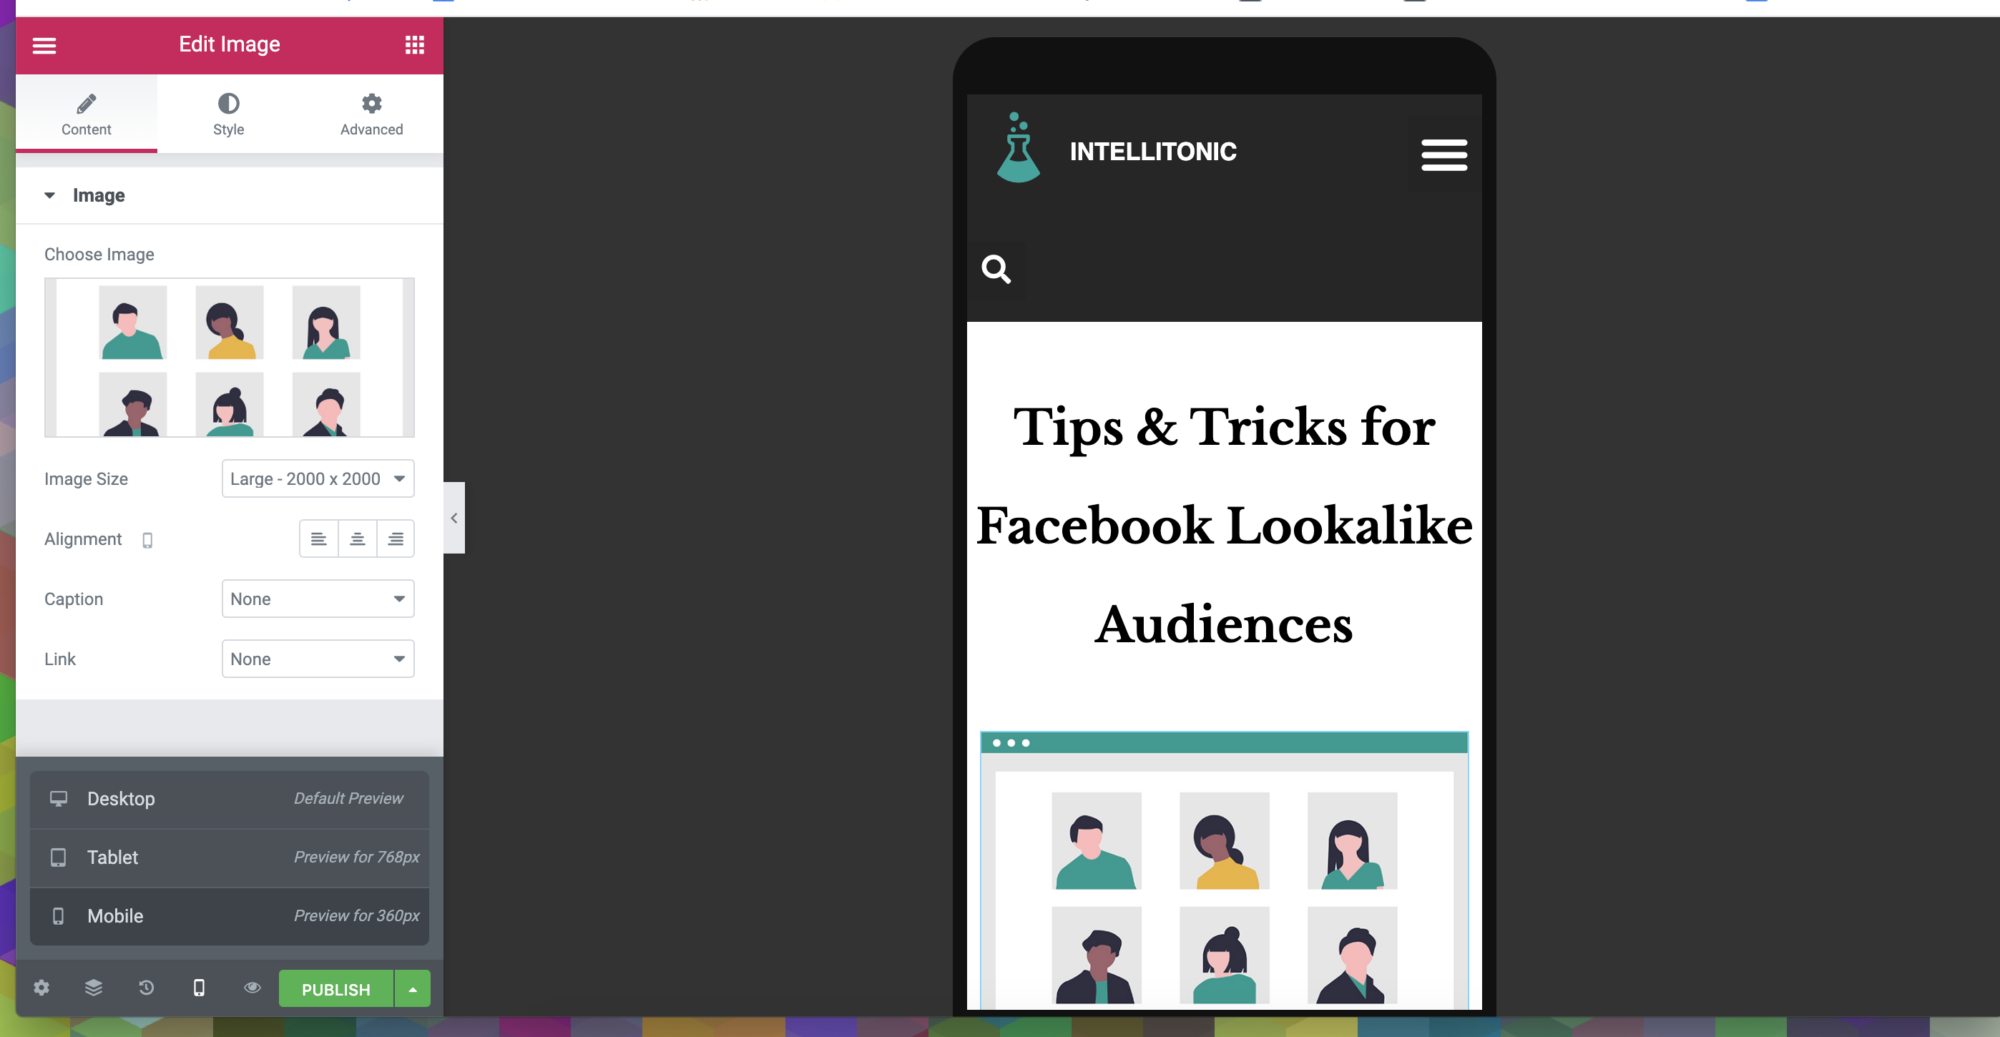 Tips and tricks for Facebook lookalike audience blog on mobile-friendly interface